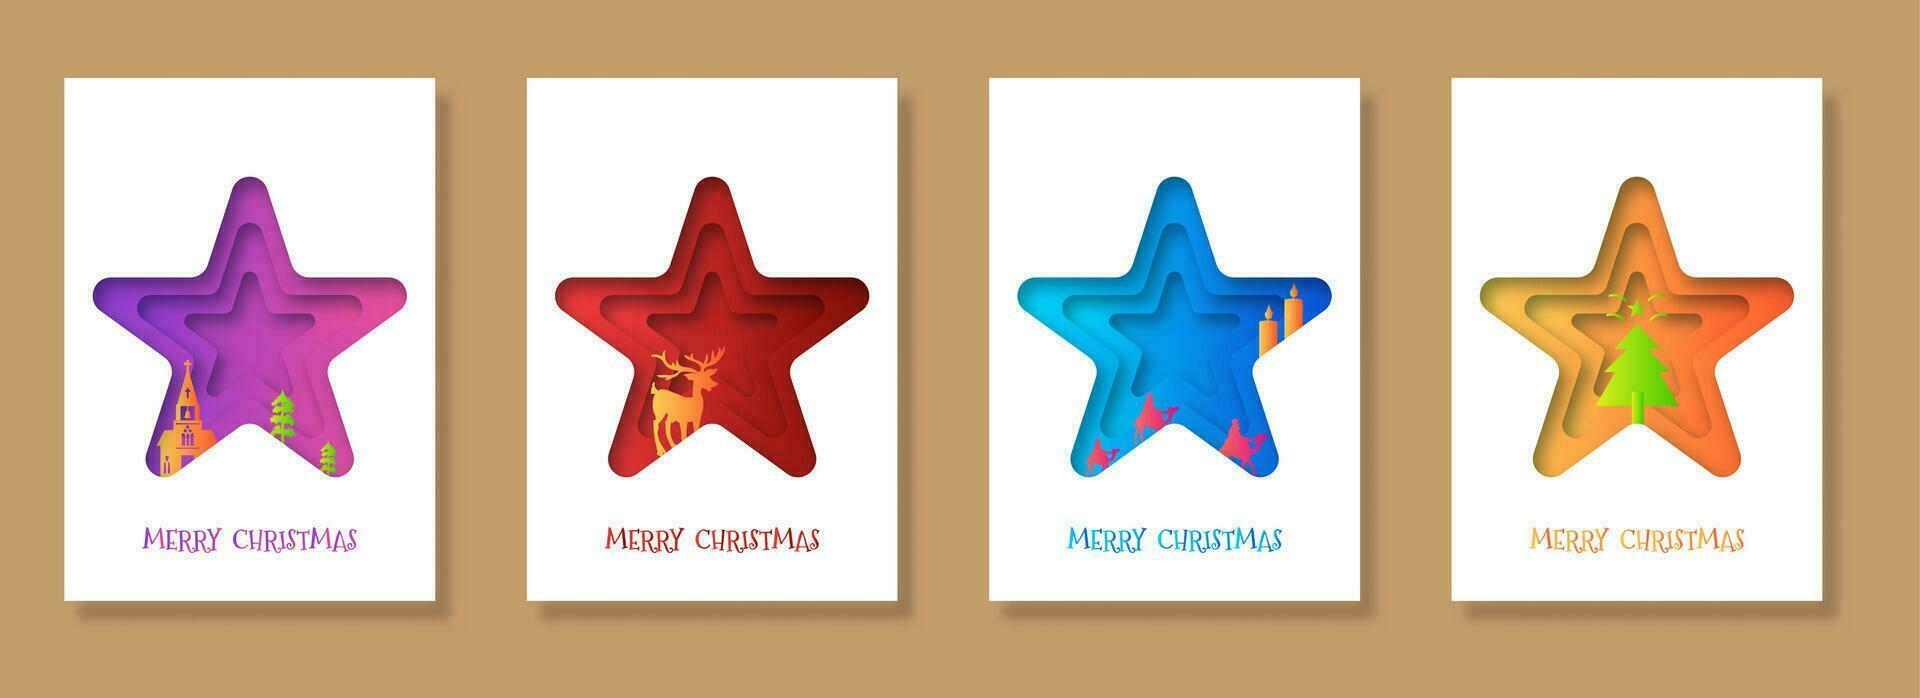 Merry Christmas and Happy New Year template for covers, invitations, posters, banners and flyers in paper cut style. Vector illustration EPS 10